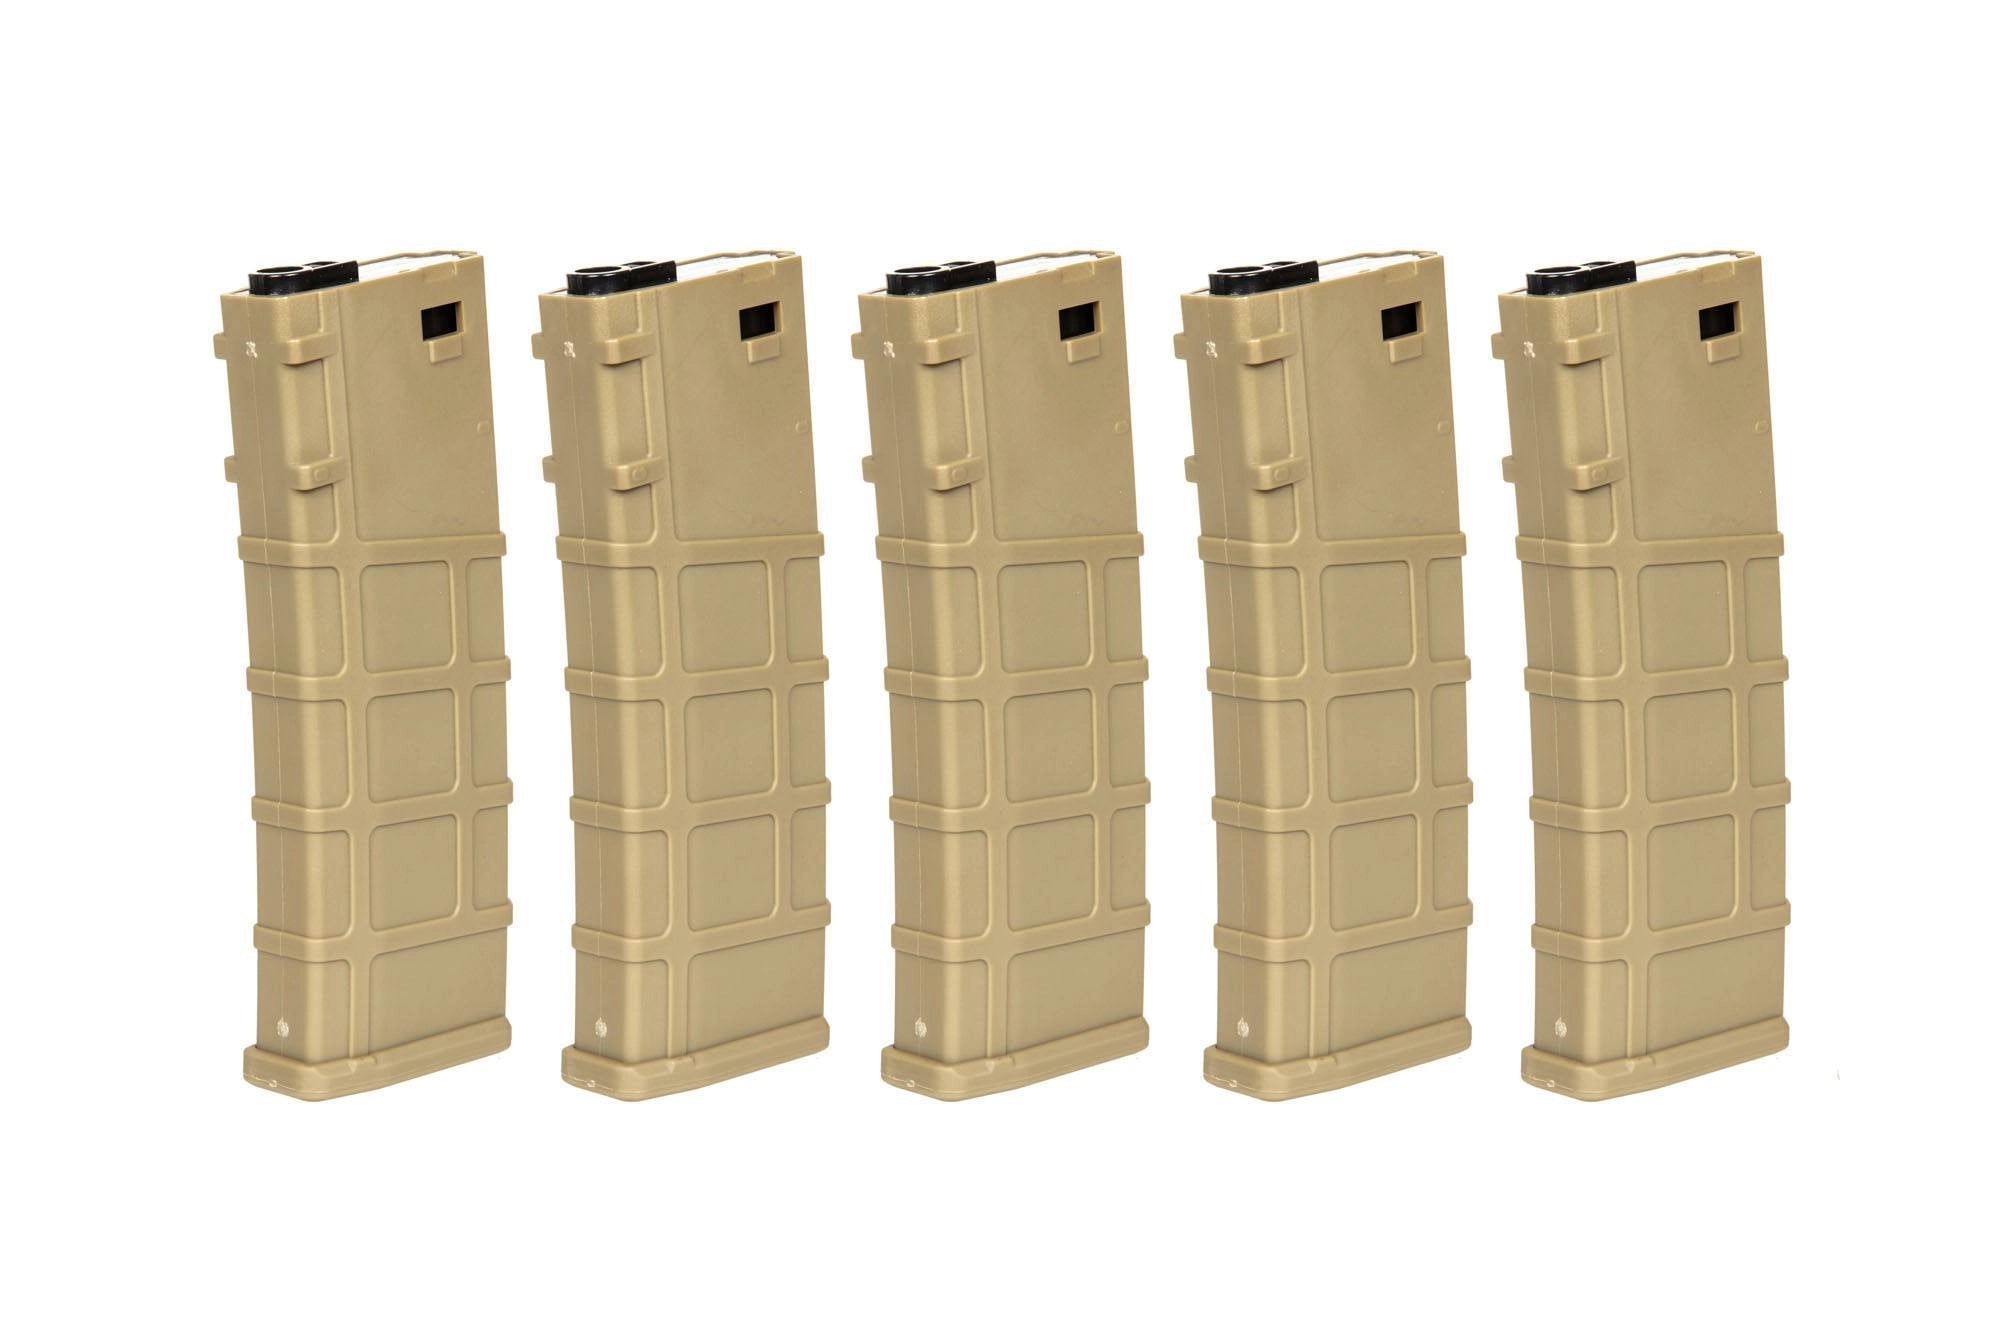 Set of 5 Polymer 200 BB's Mid-Cap magazines for M4/M16 replicas - Tan-2